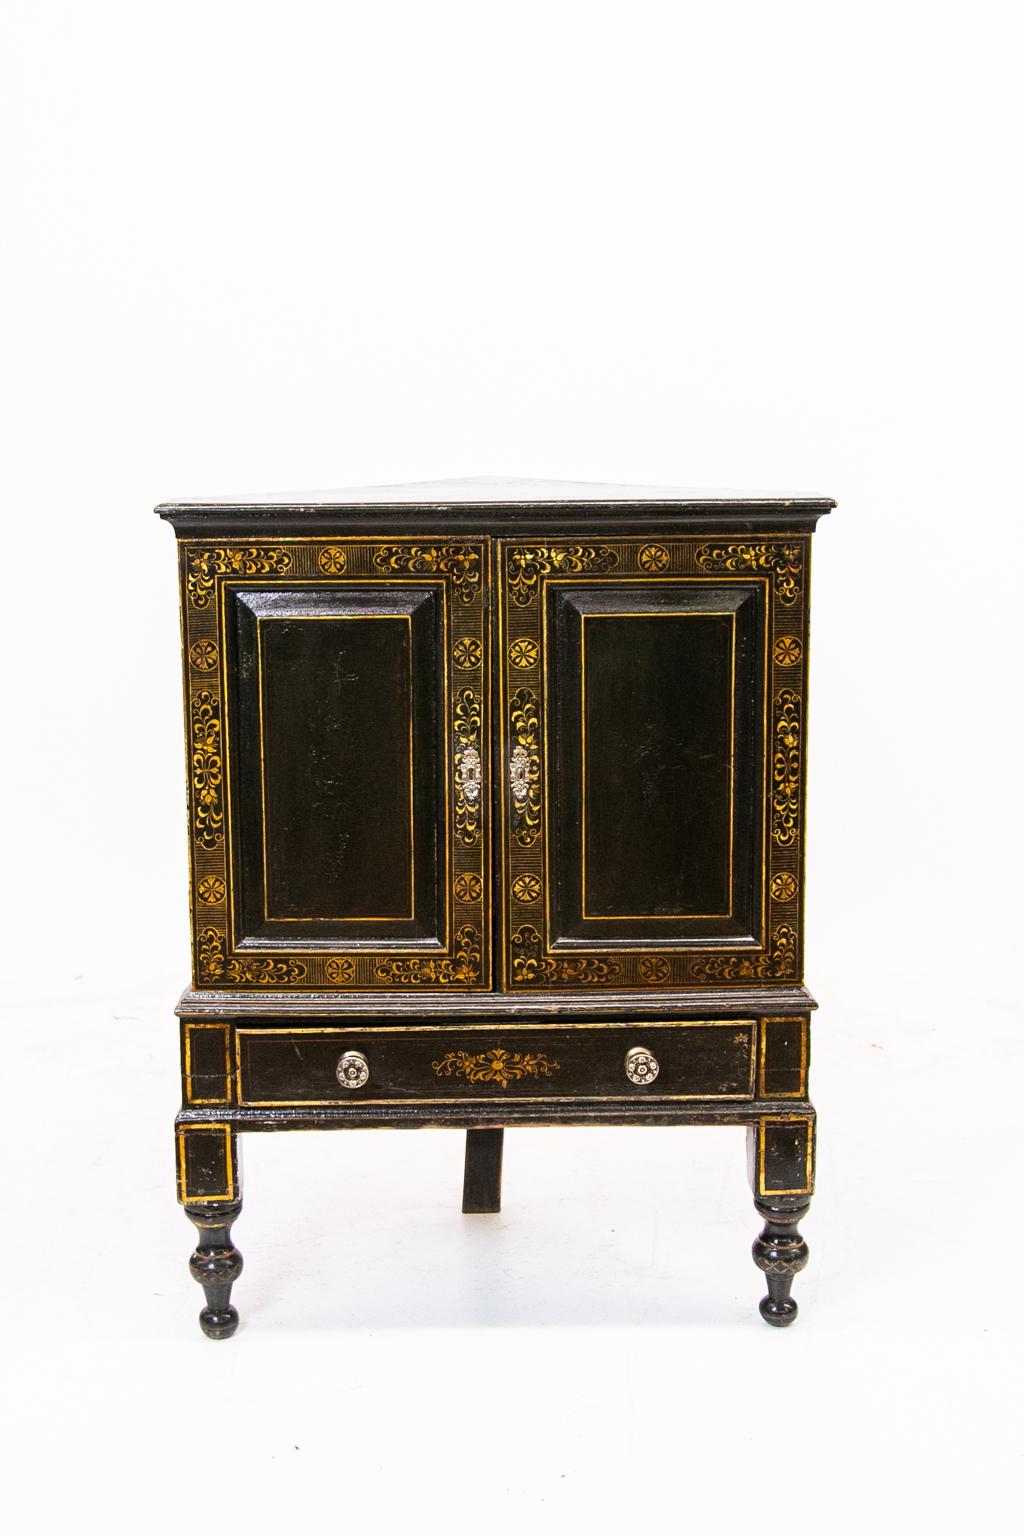 English fitted pine lacquer corner chest with eighteen interior cork lined drawers, lower single drawer, raised panel doors with floral lacquer borders and painted line inlay, on turned feet.
 